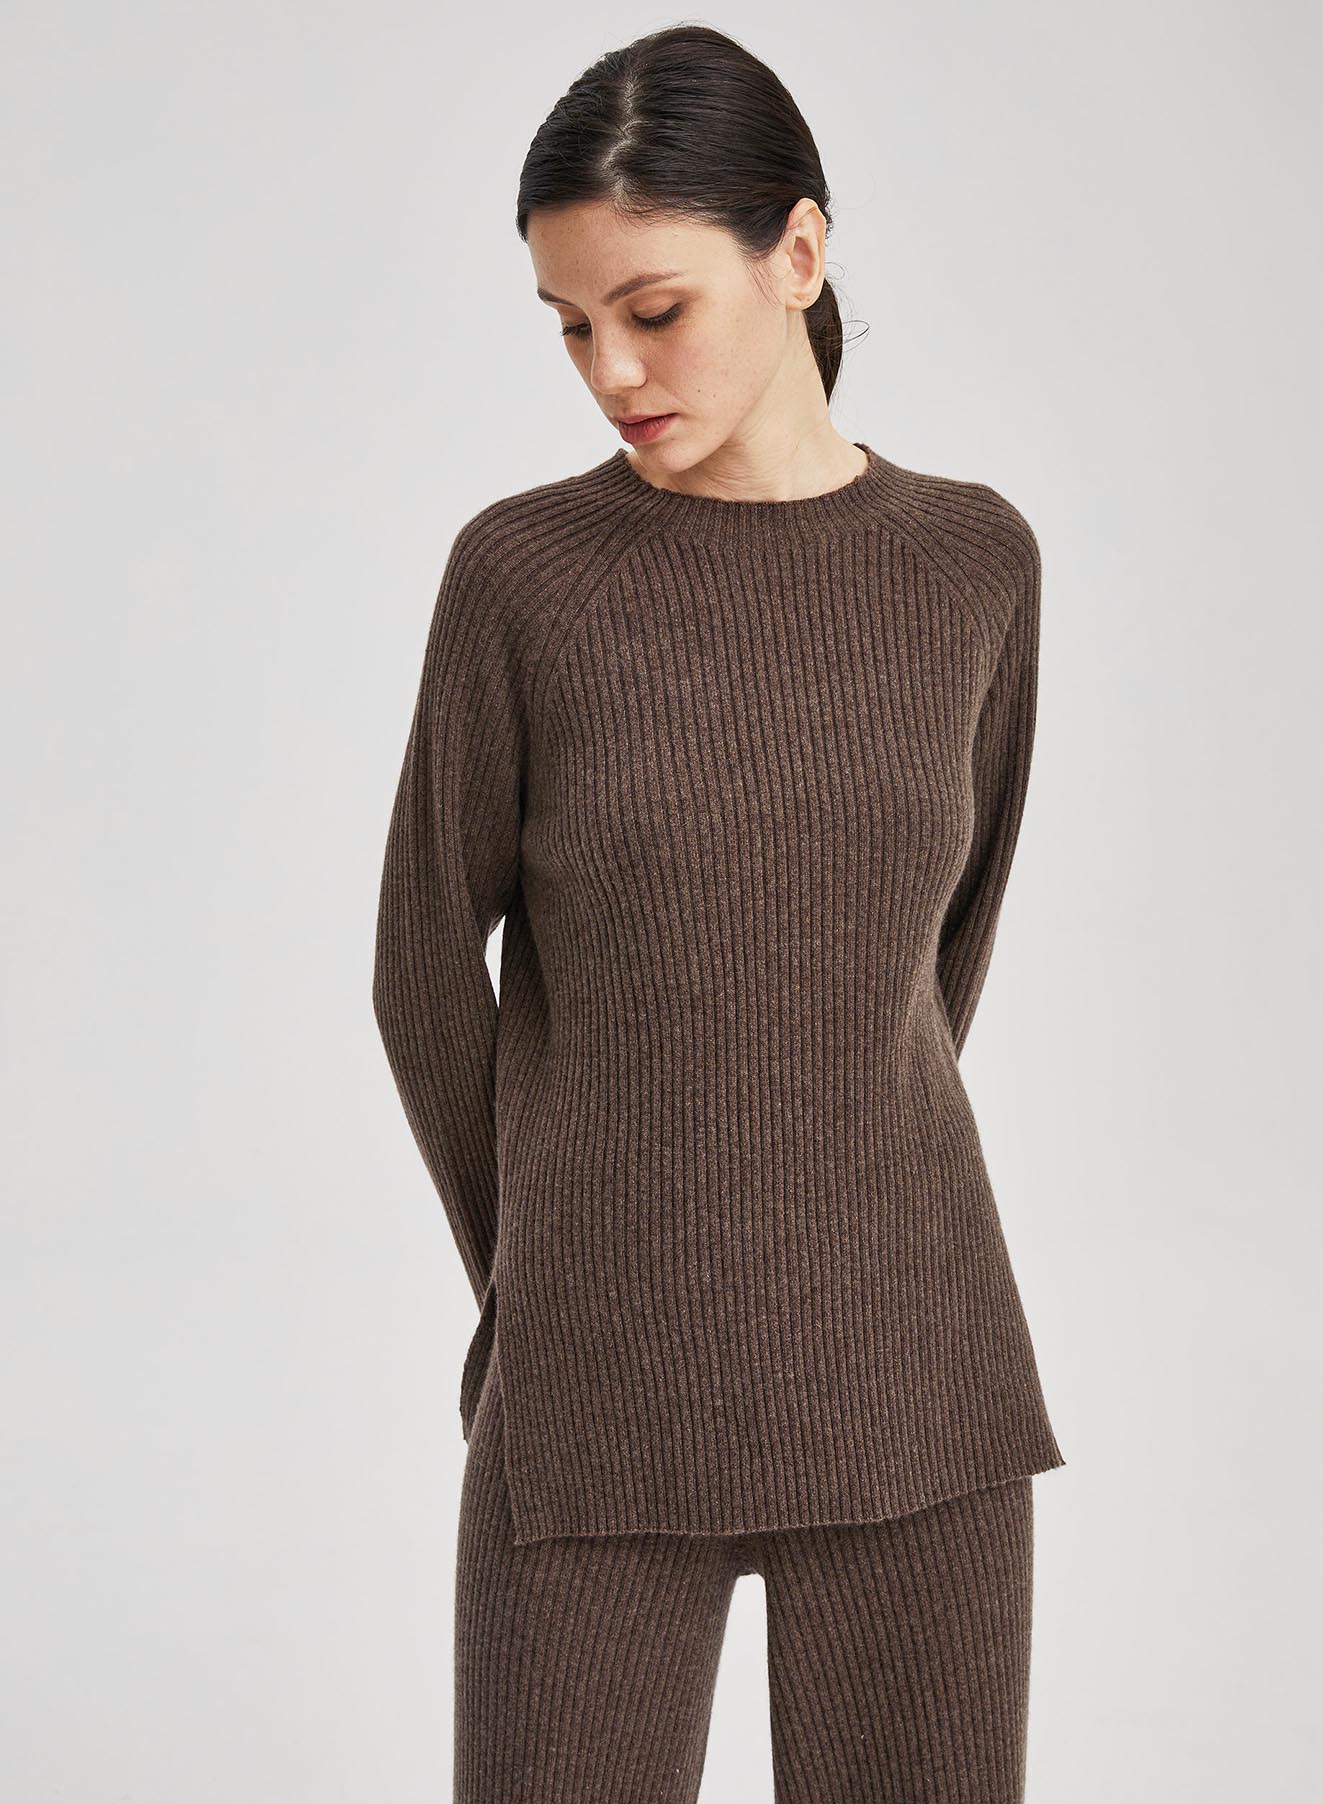 100% Cashmere Long Sleeved Rib-Knit Pullover Top